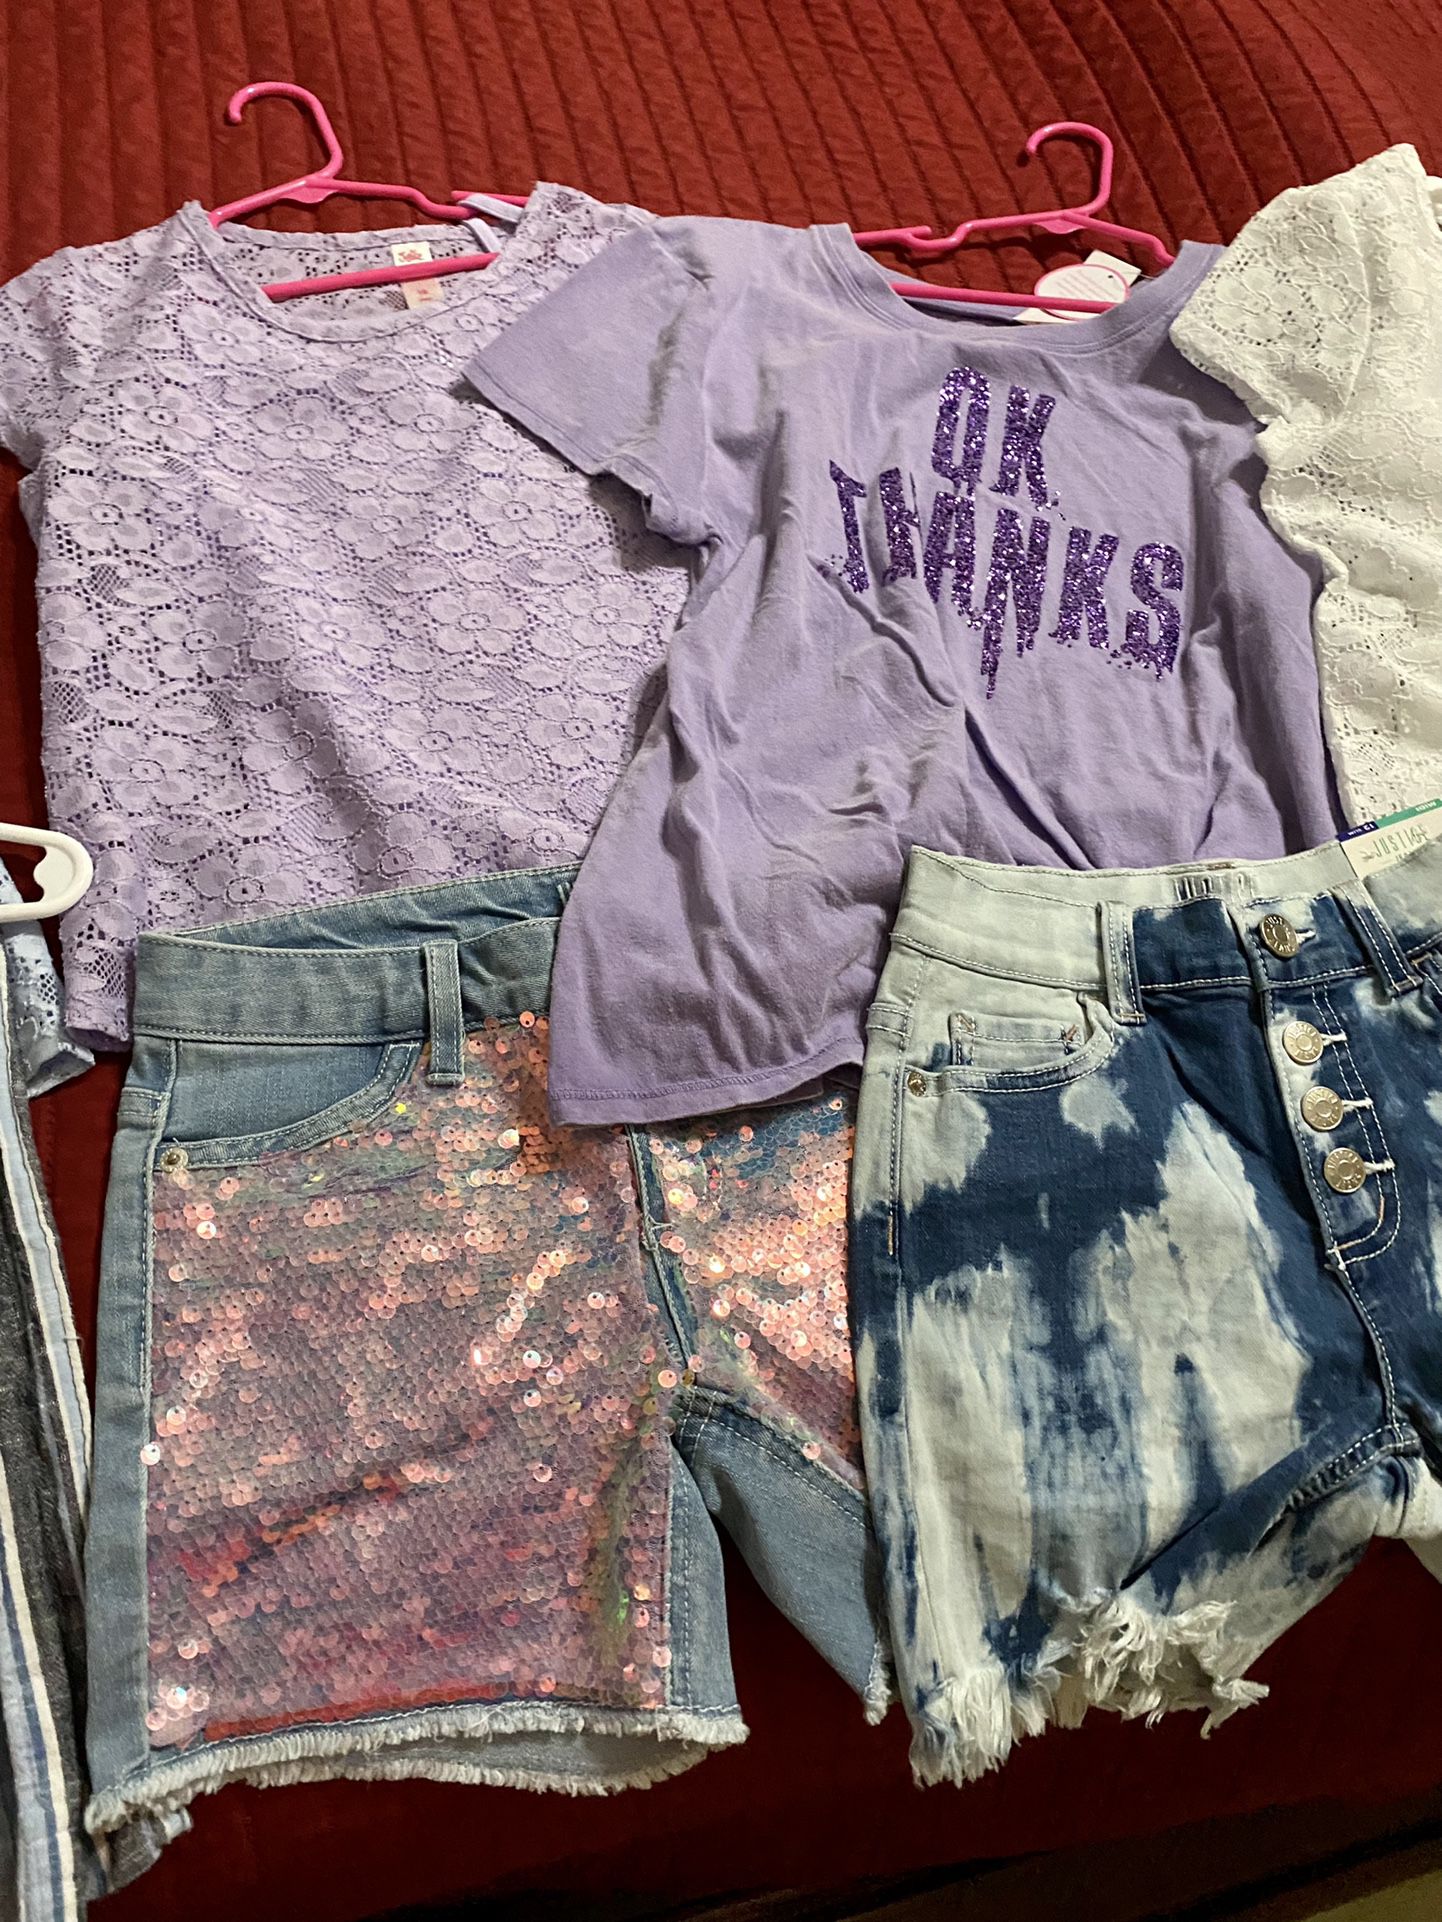 New With Tags  Girls Justice Clothes & More!! 28 Pieces Total!!